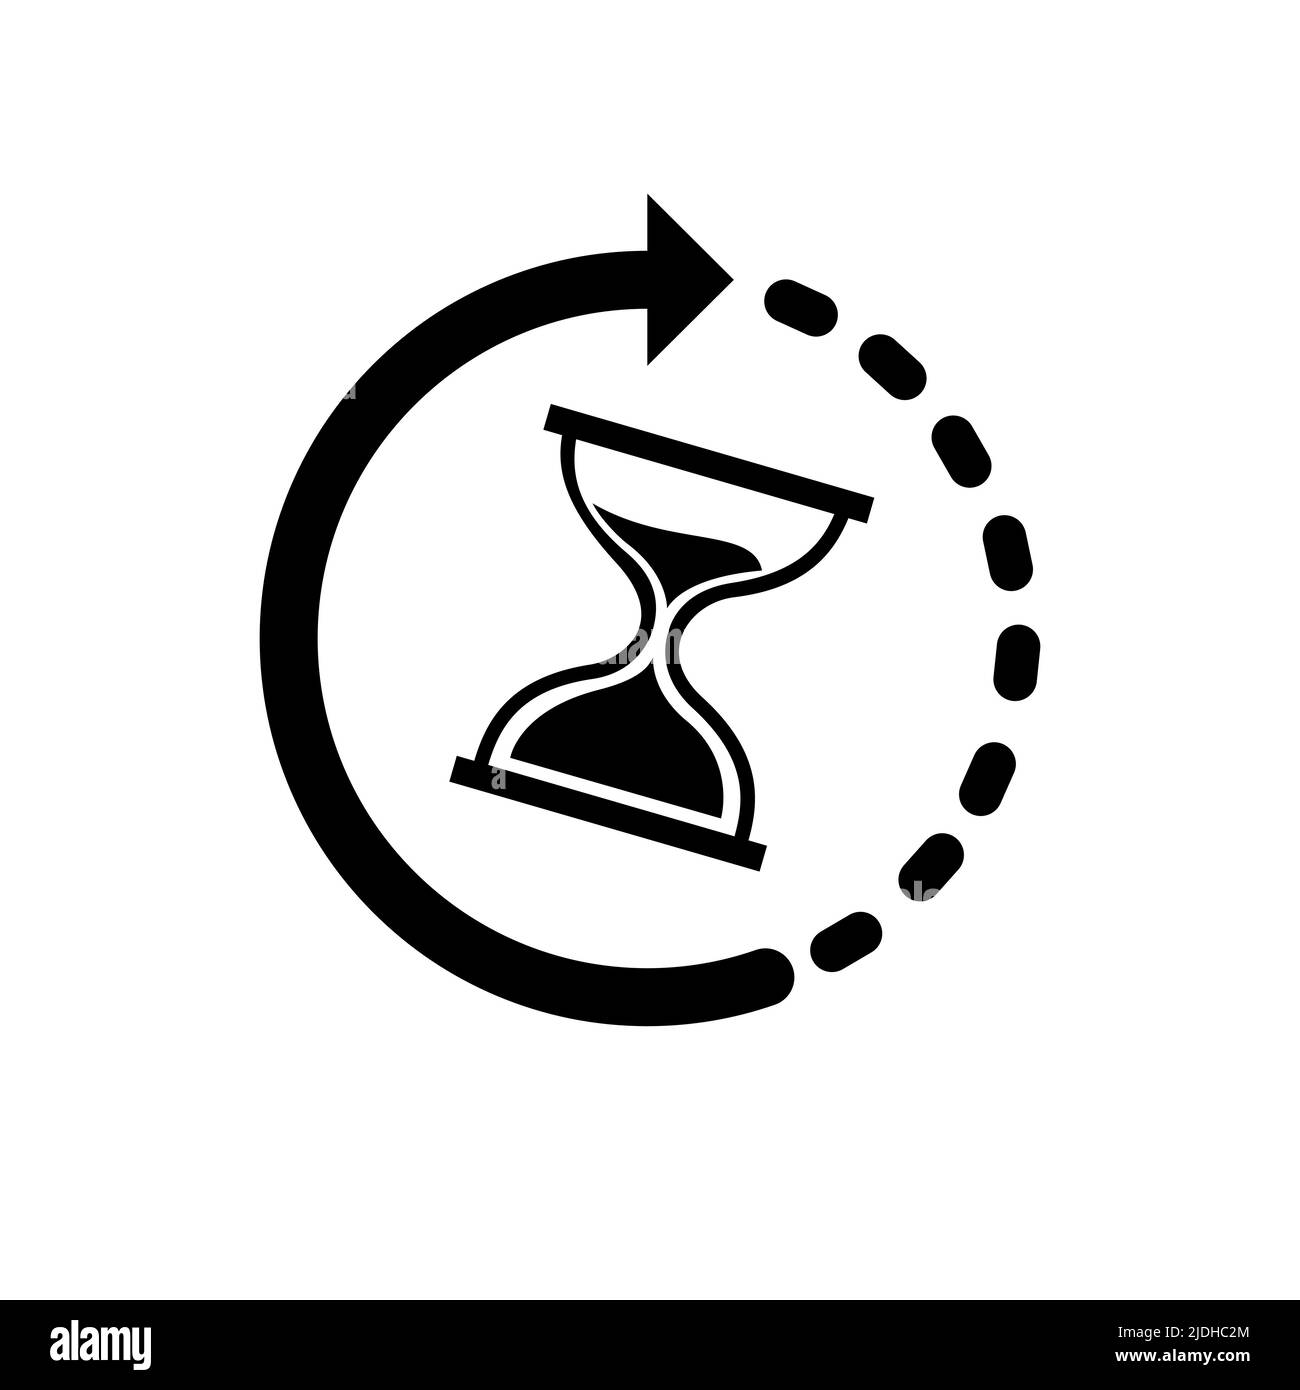 Wait time icon. Hourglass clock vector. Modern simple flat hour glass sign. Trendy stop symbol for web site. Logo illustration. Stock Vector